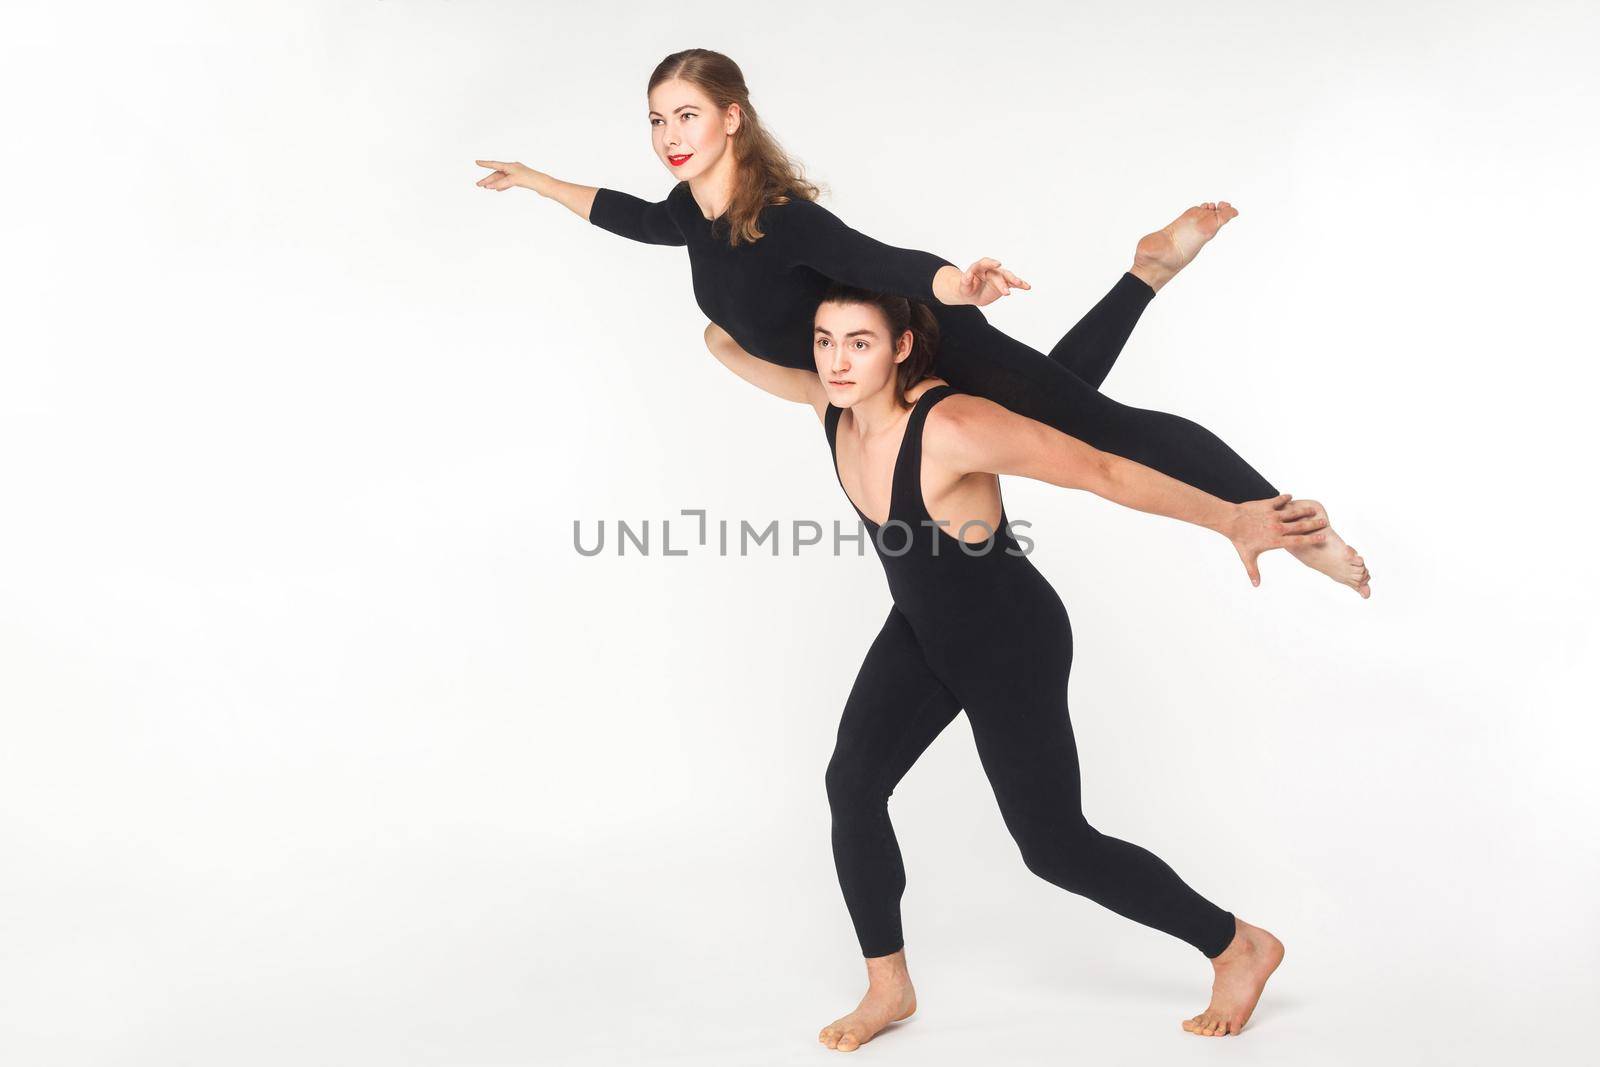 Acrobatic concept, fly pose. Young man holding woman and balancing. Studio shot, isolated on white background